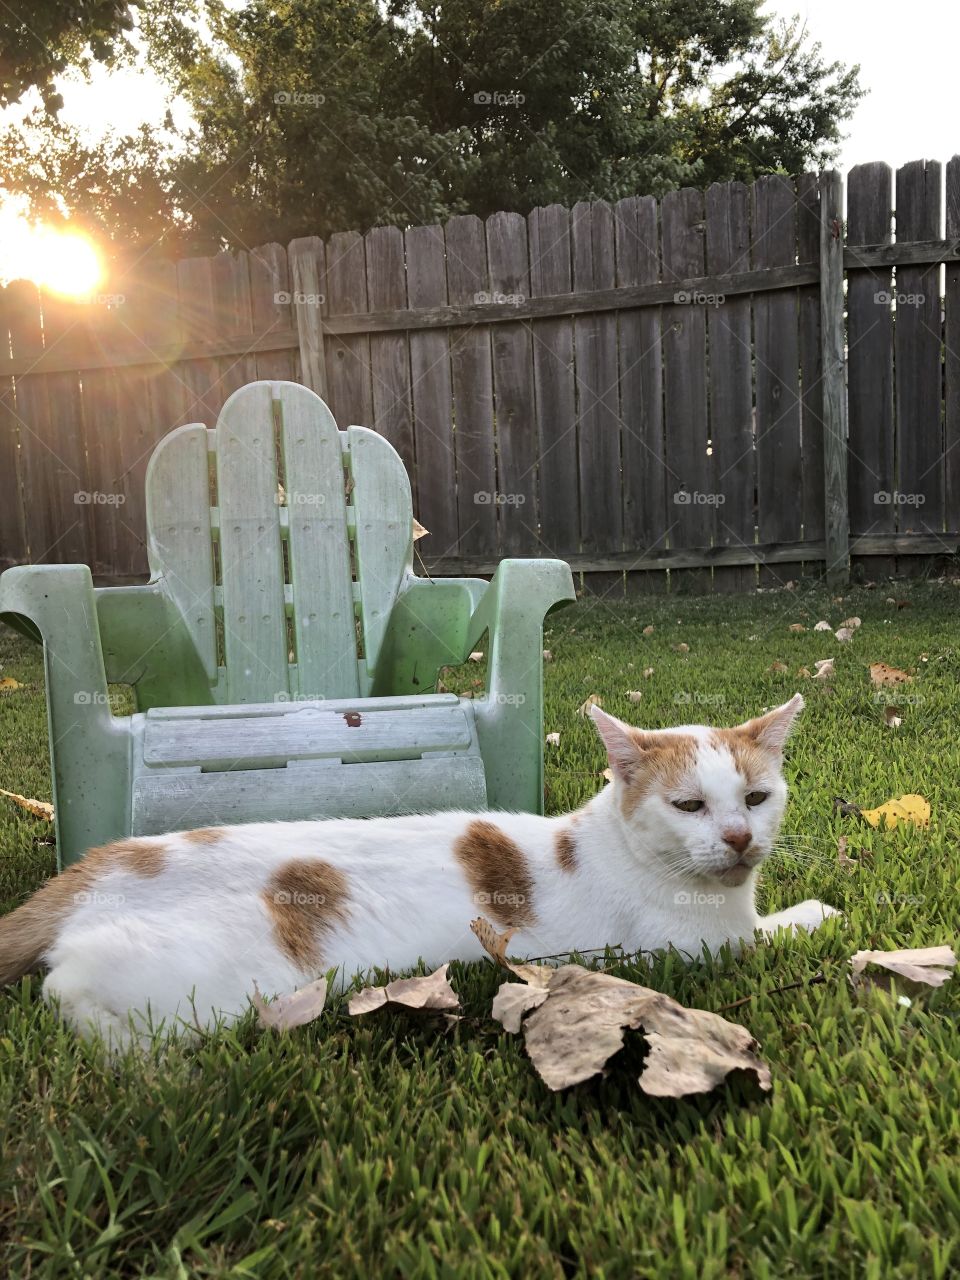 sun goes down and cat in yard